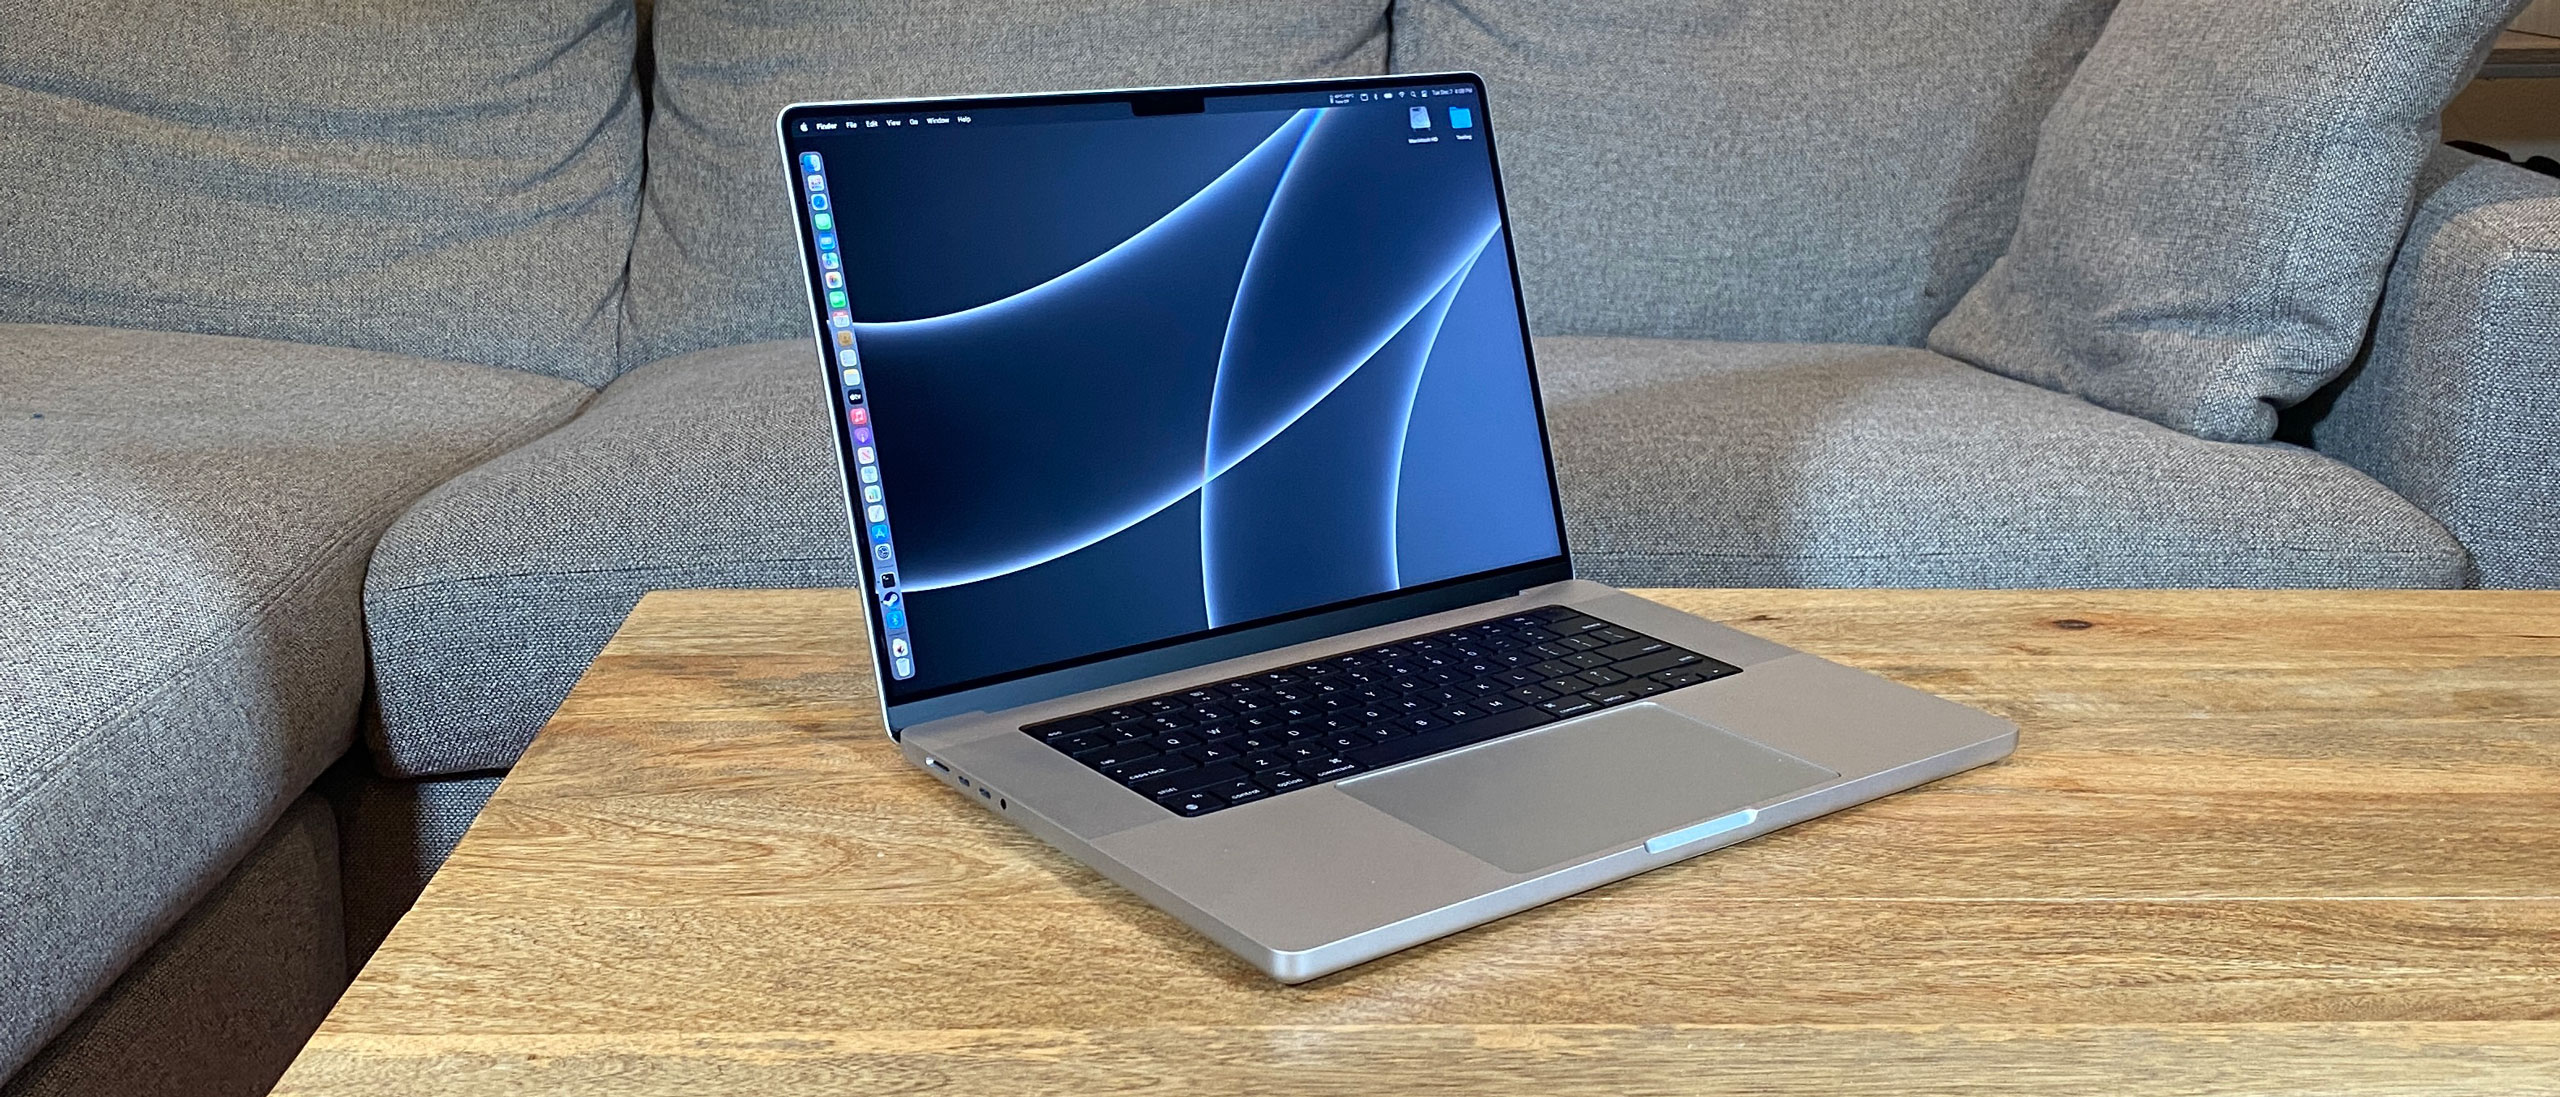 MacBook Pro (16-inch, 2021) Review: M1 Max Shows Real Power | Tom's Hardware